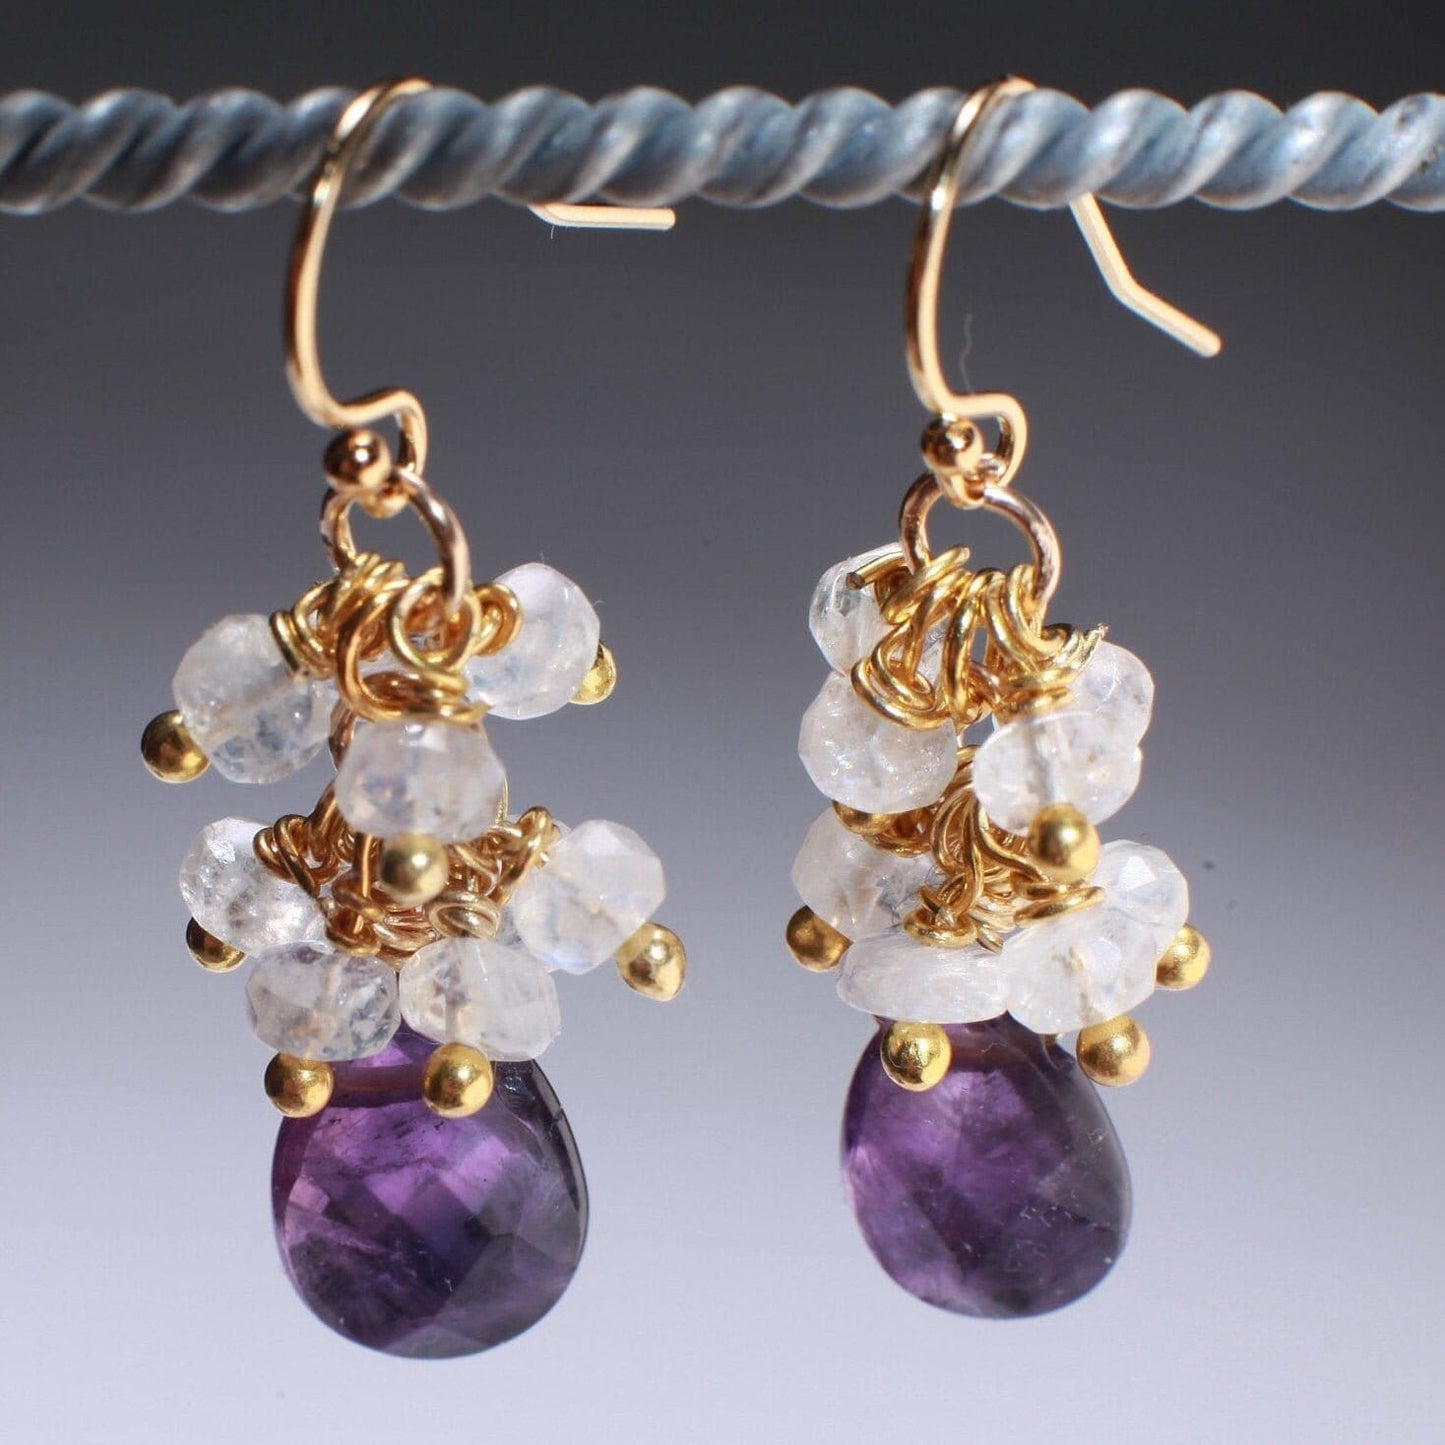 Natural Moonstones Cluster Earrings with Natural Amethyst Briolette Drop in 14K Gold Filled Ear Wire